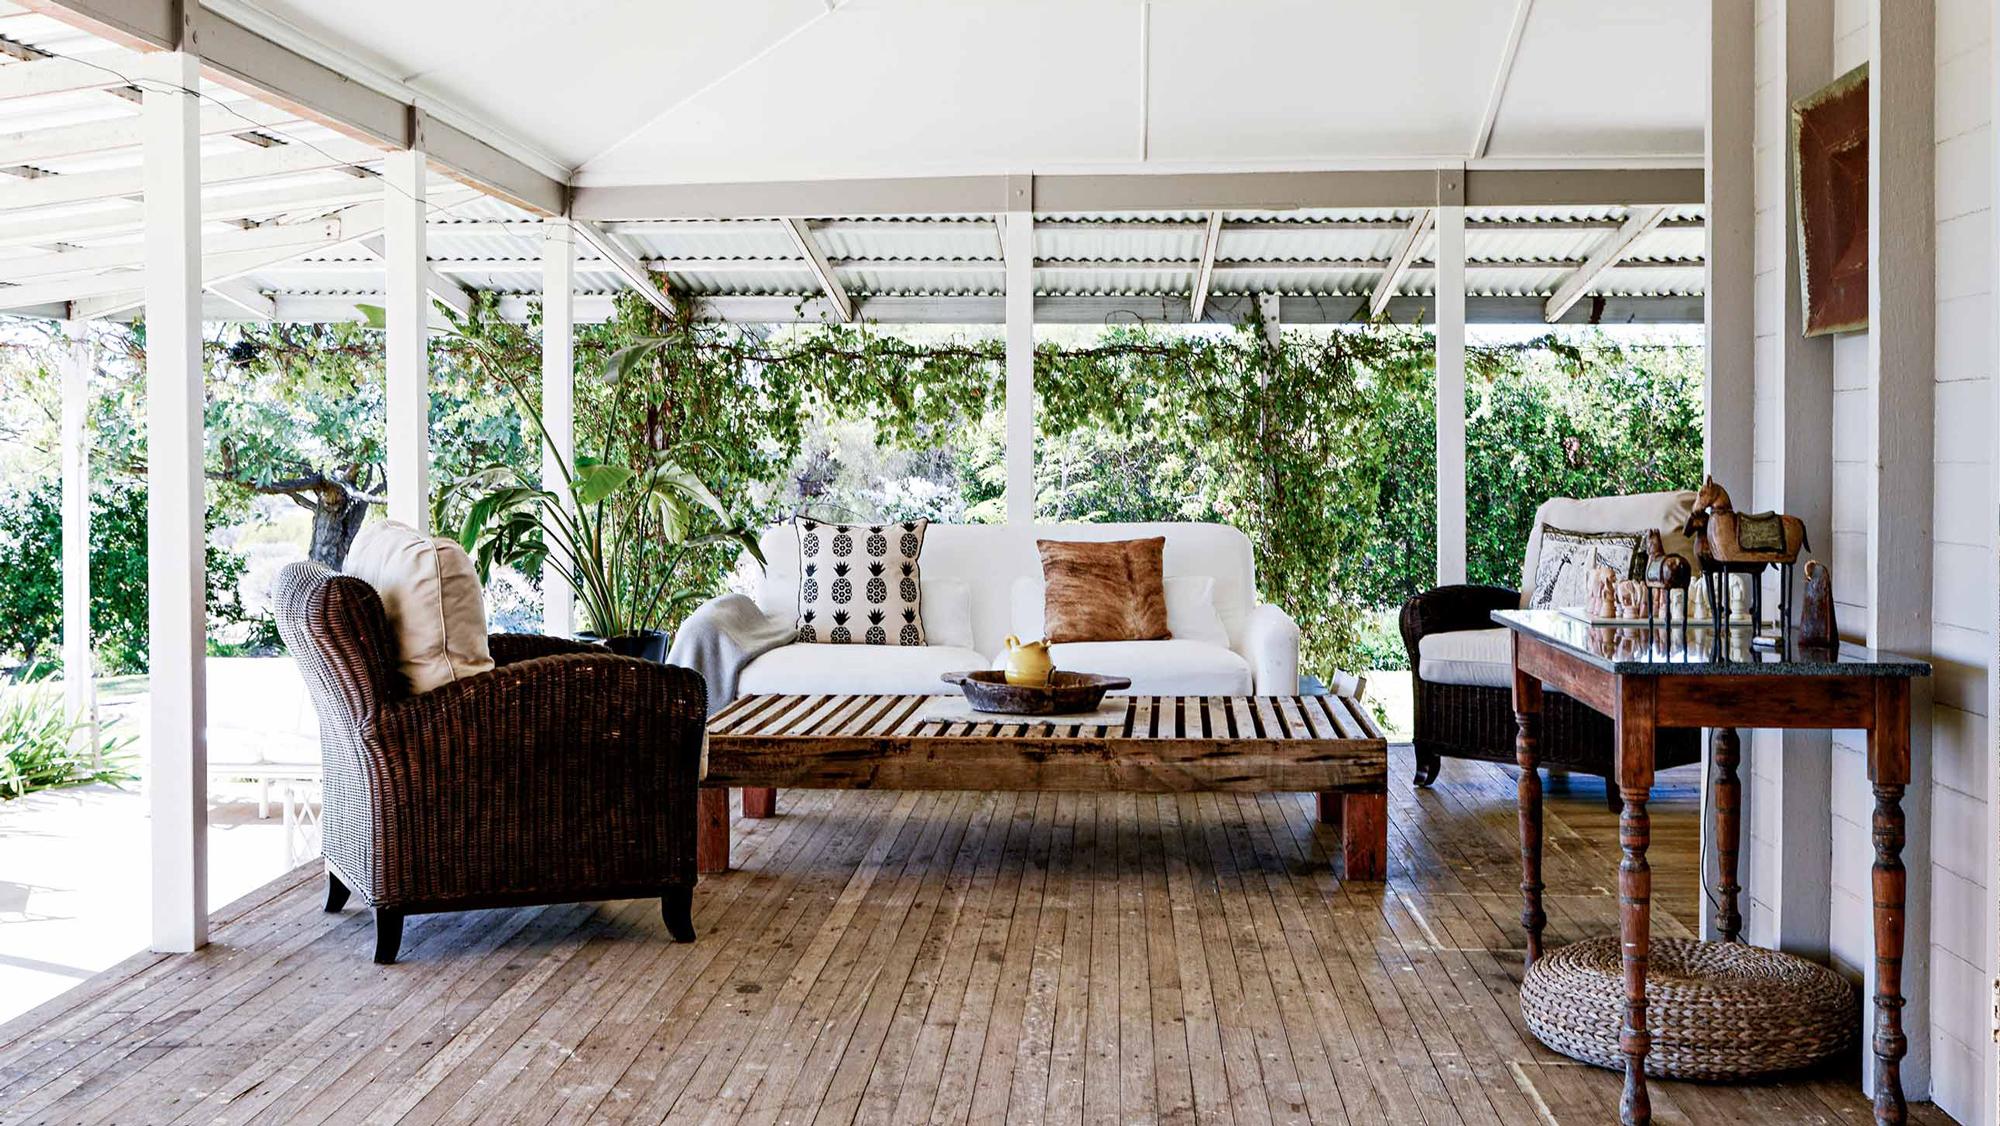 Homelife - 10 verandahs you'll want to relax on